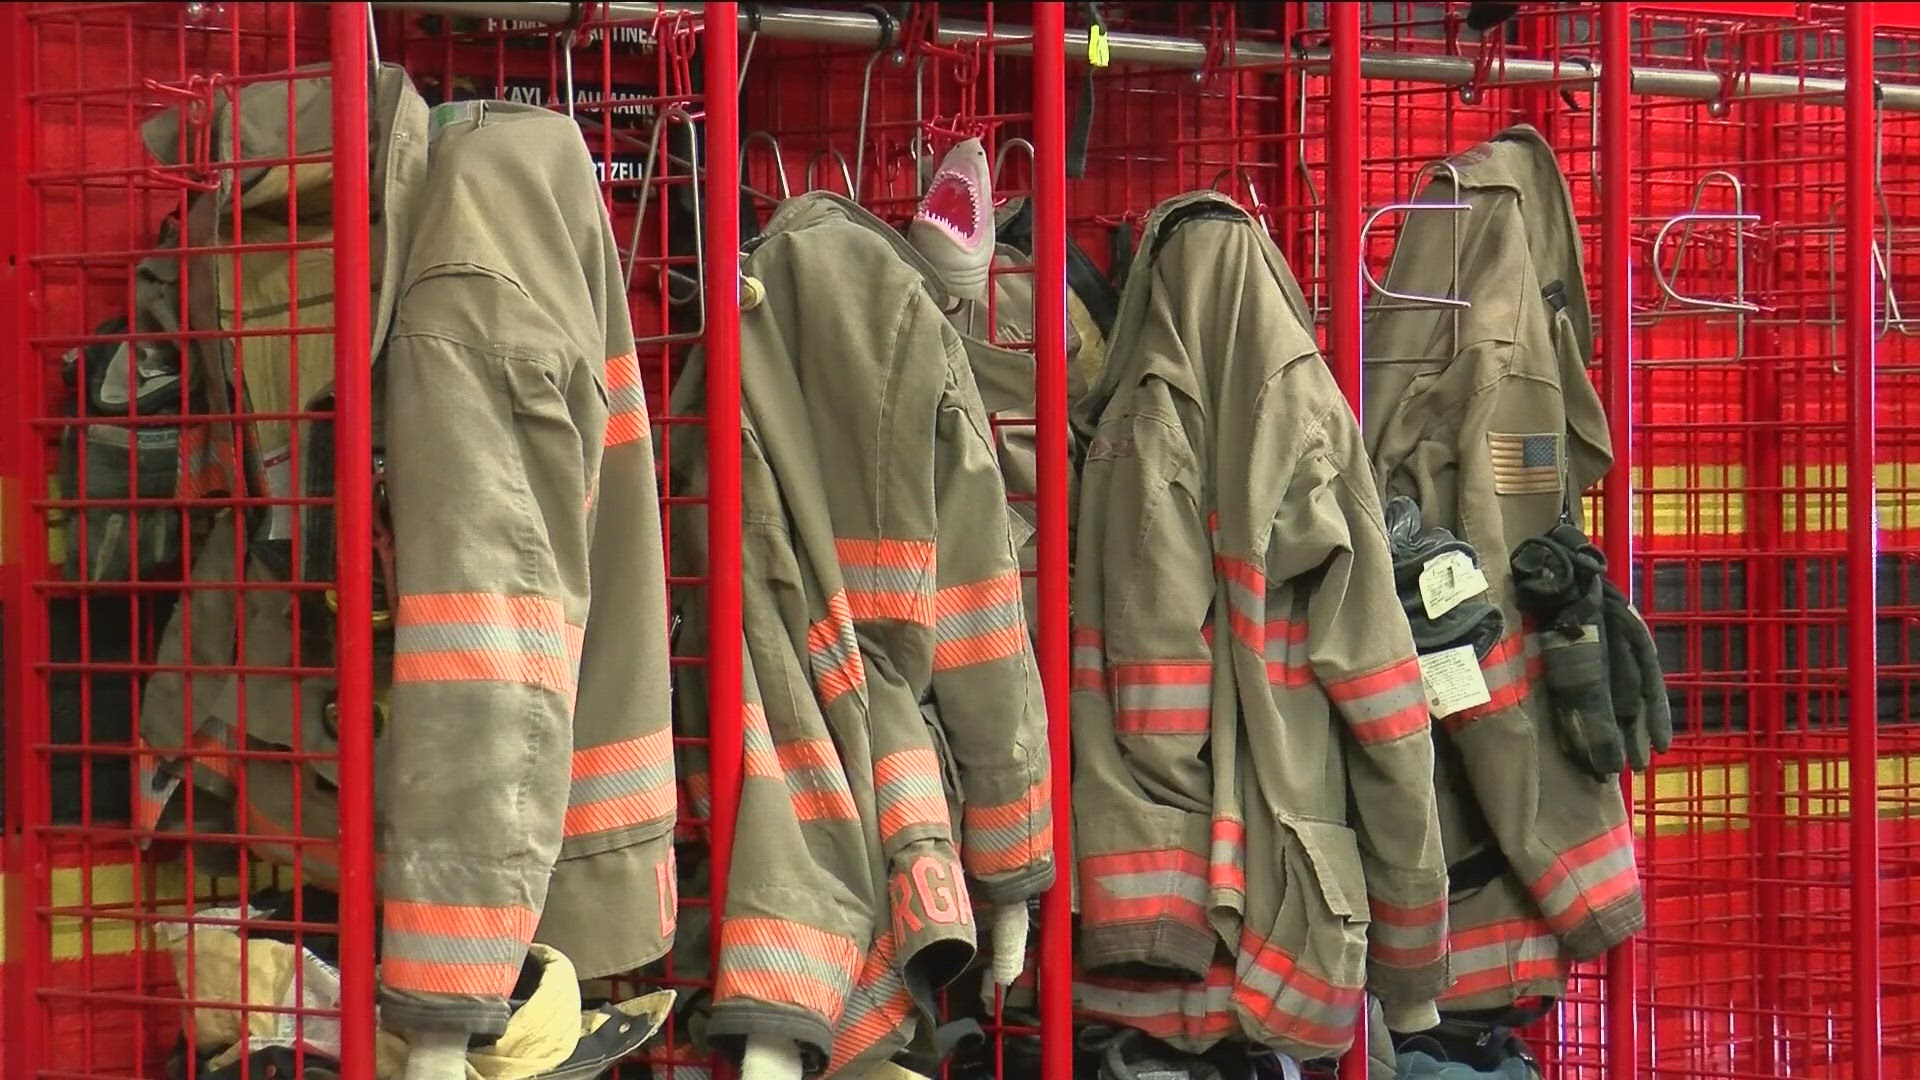 Rossford City Council voted unanimously Monday night on the new plan, which will include the hiring of 15 full-time firefighters.